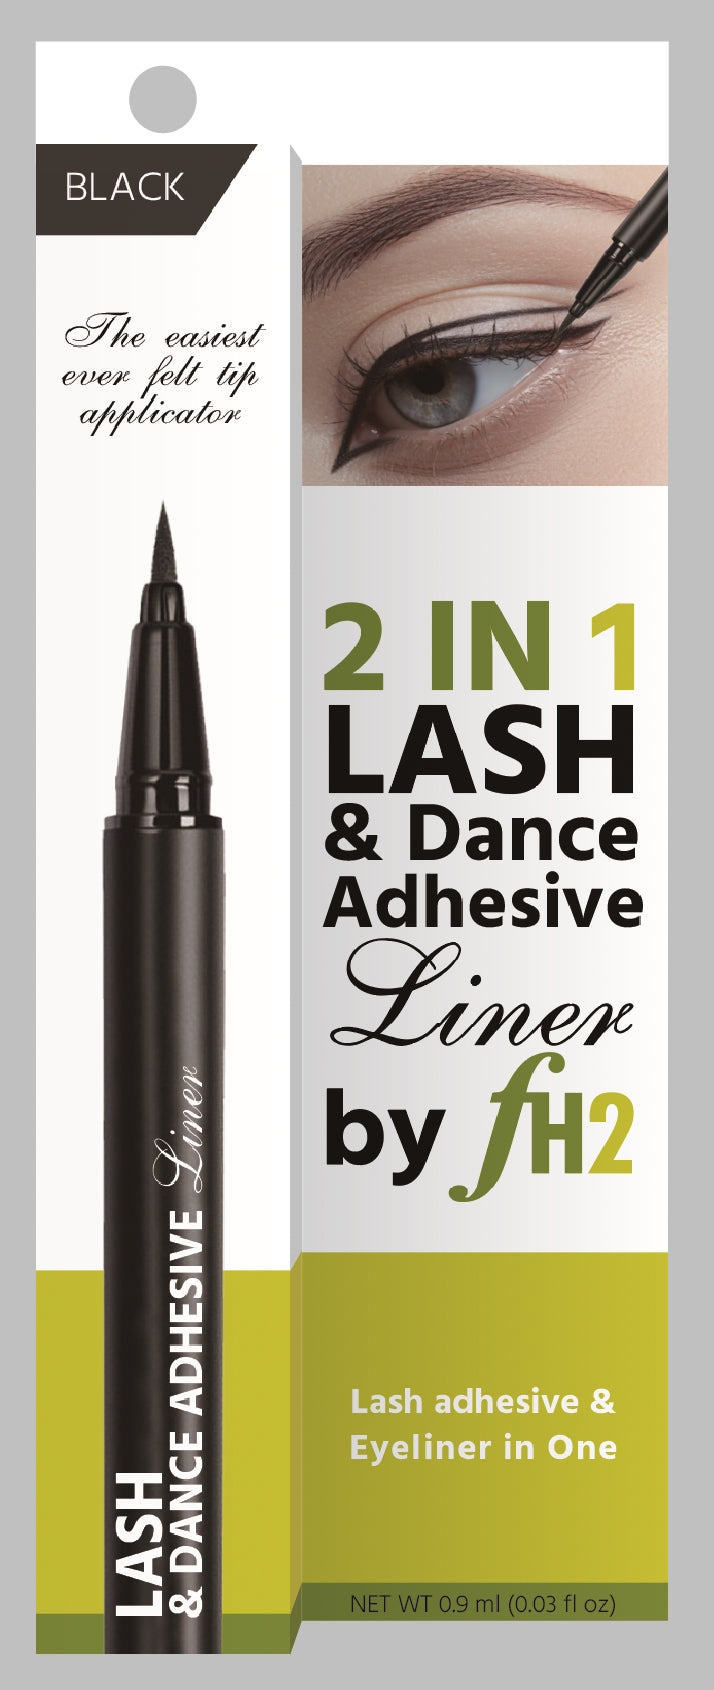 2 in 1 Lash Adhesive and Liner